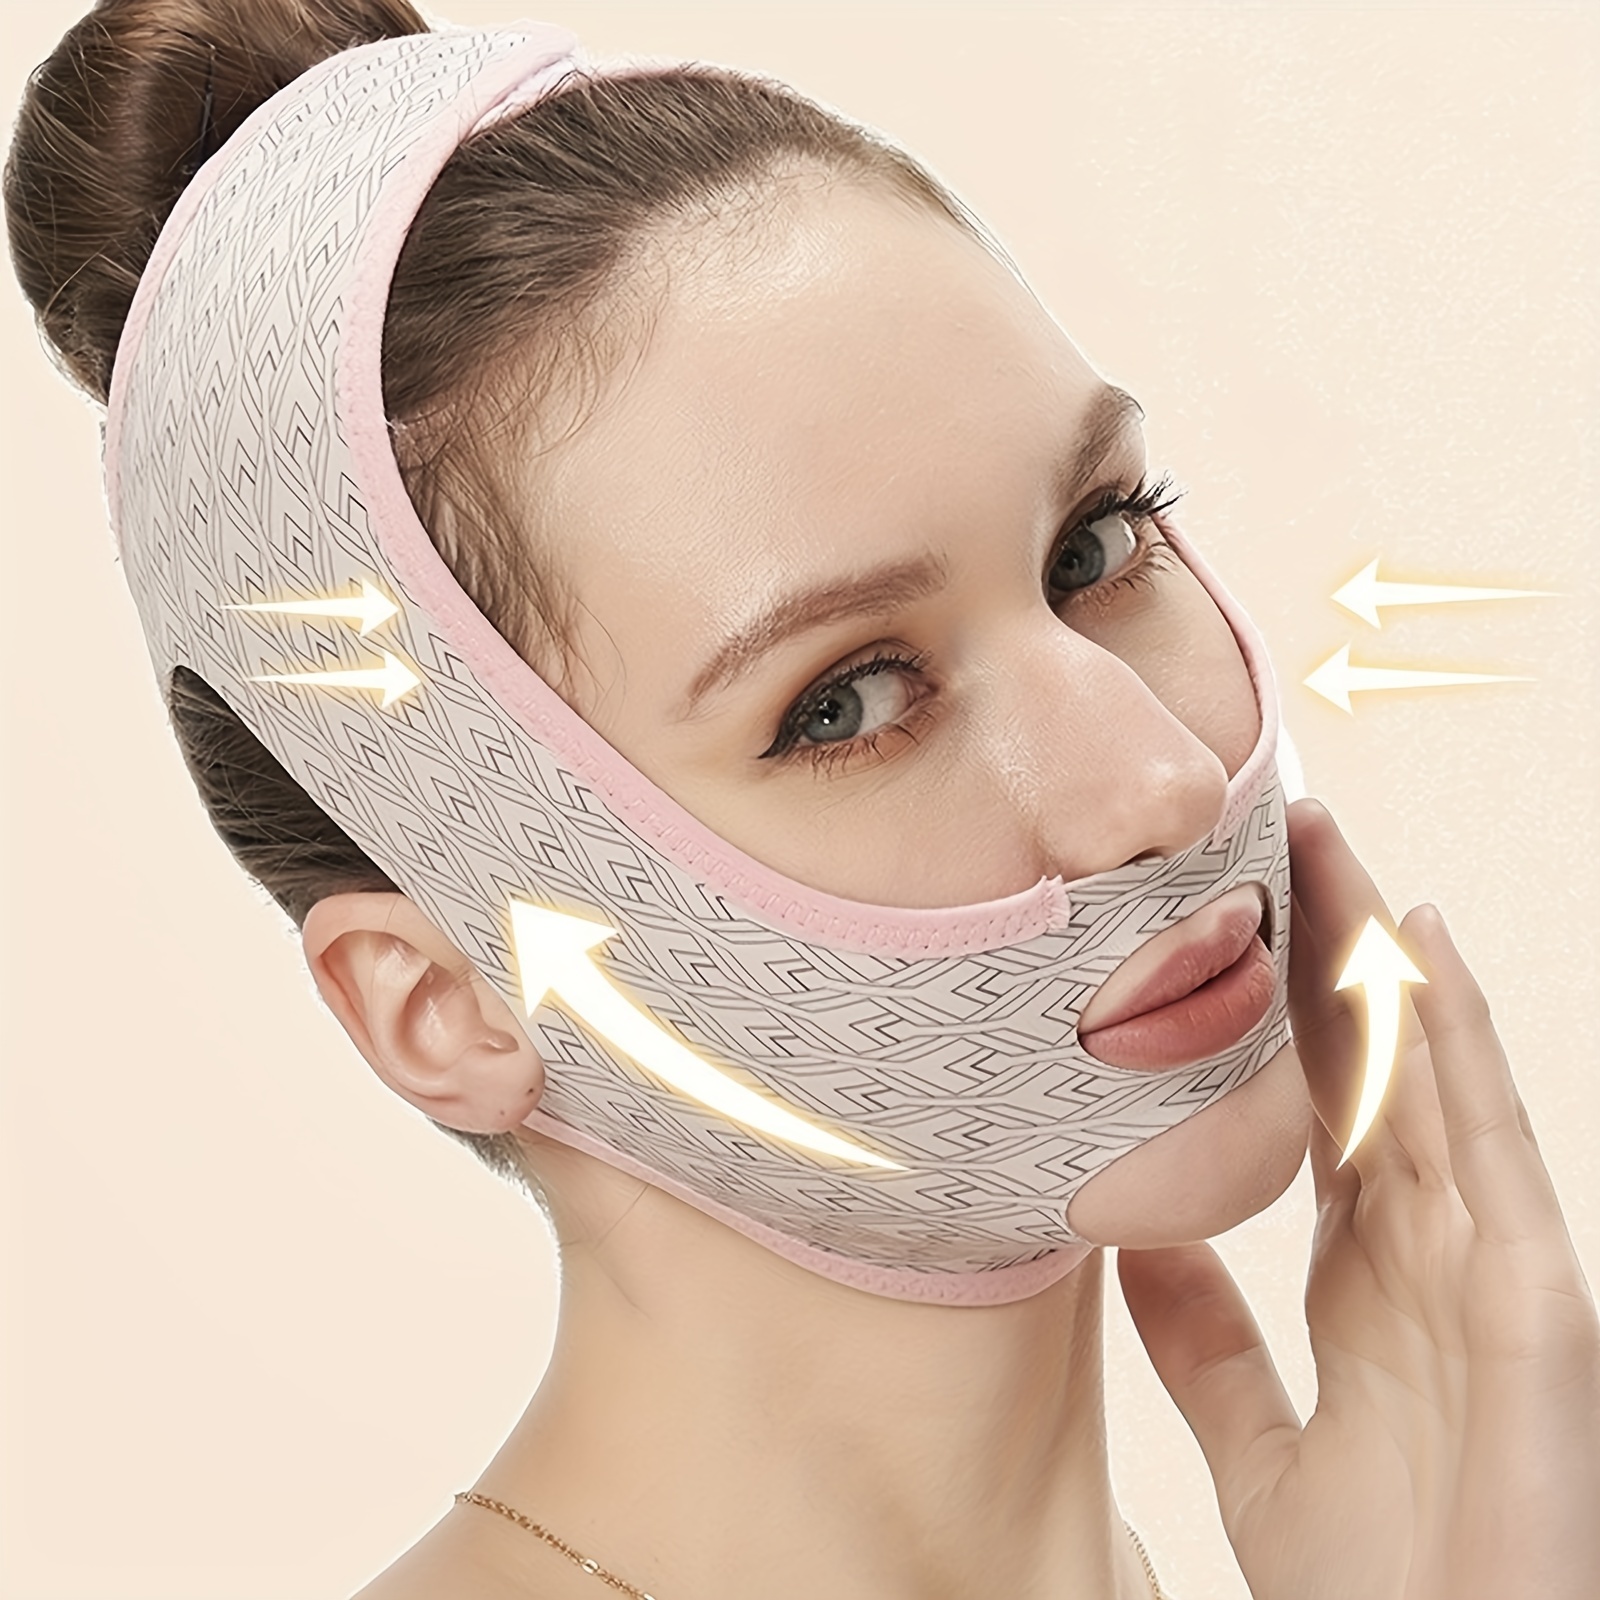 V-line Face Lifting Bandage For Anti-aging, Double Chin Reducing, Sleep  Mask, Breathable & Lightweight Facial Strap